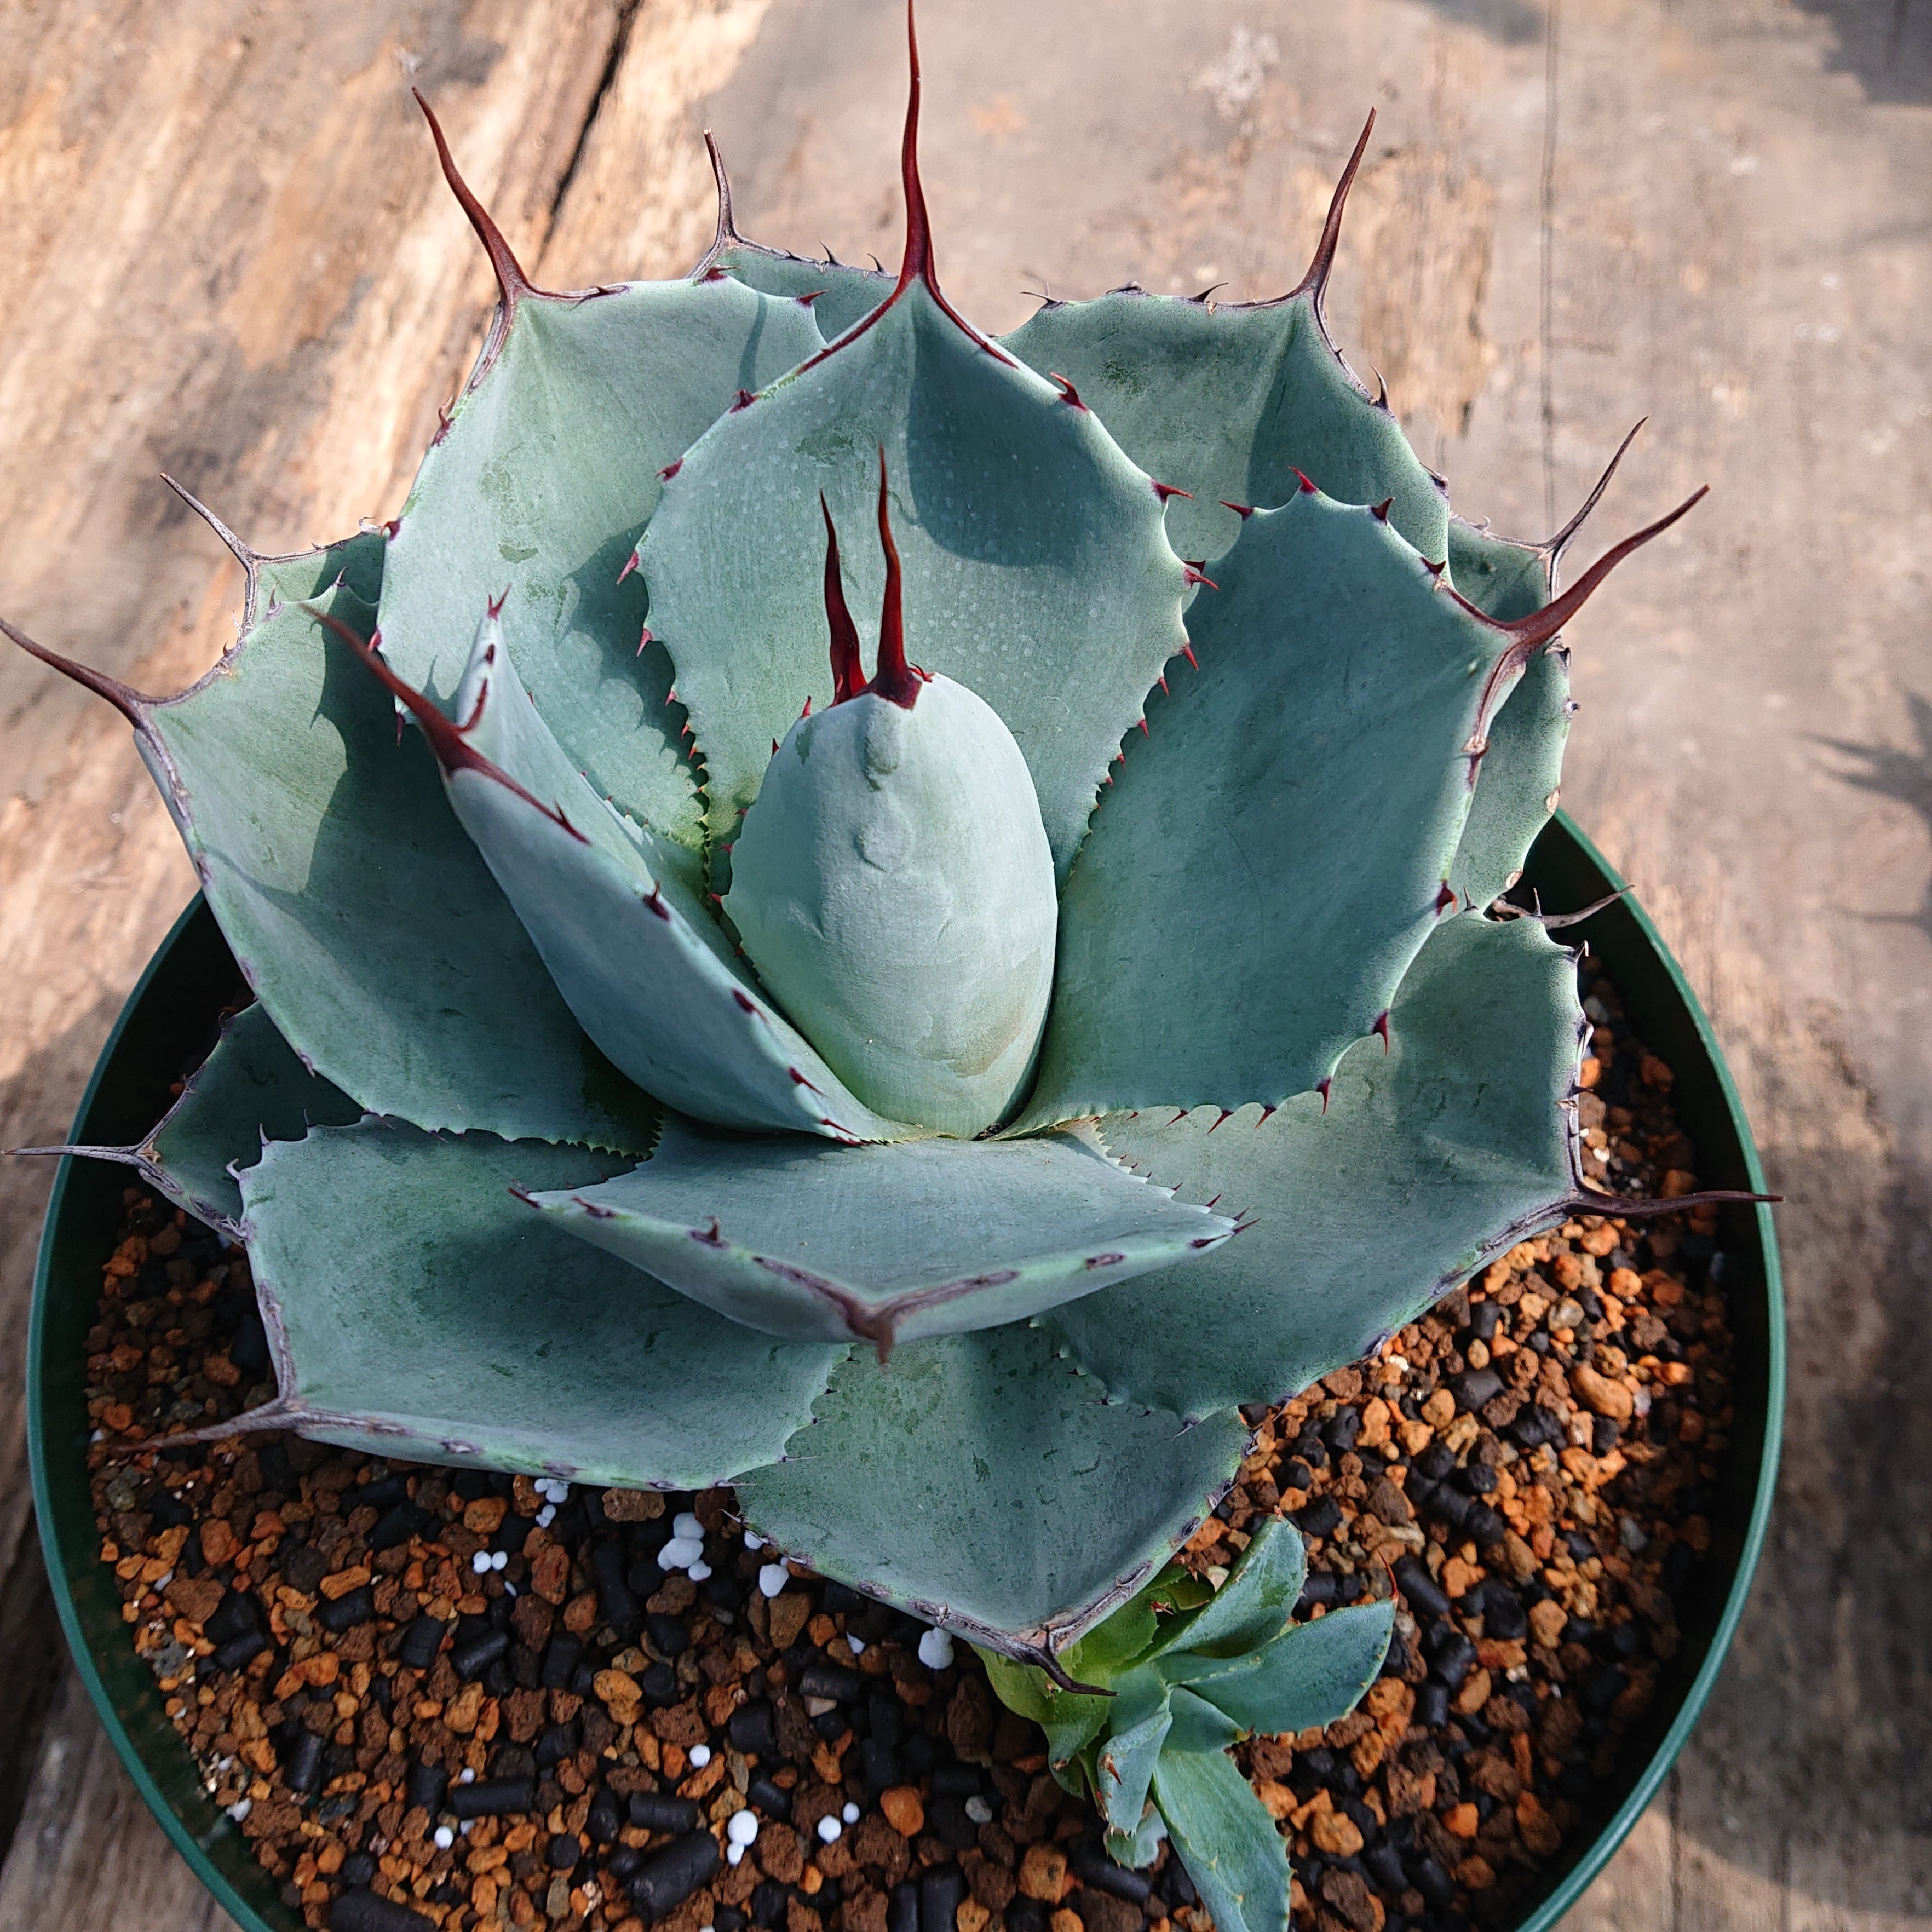 no.3 アガベ パリー トランカータ agave parryi truncata 子株付き 【発根済】 |  多肉植物ハオルチア・アガベ・サンスべリアの店mellowgarden powered by BASE